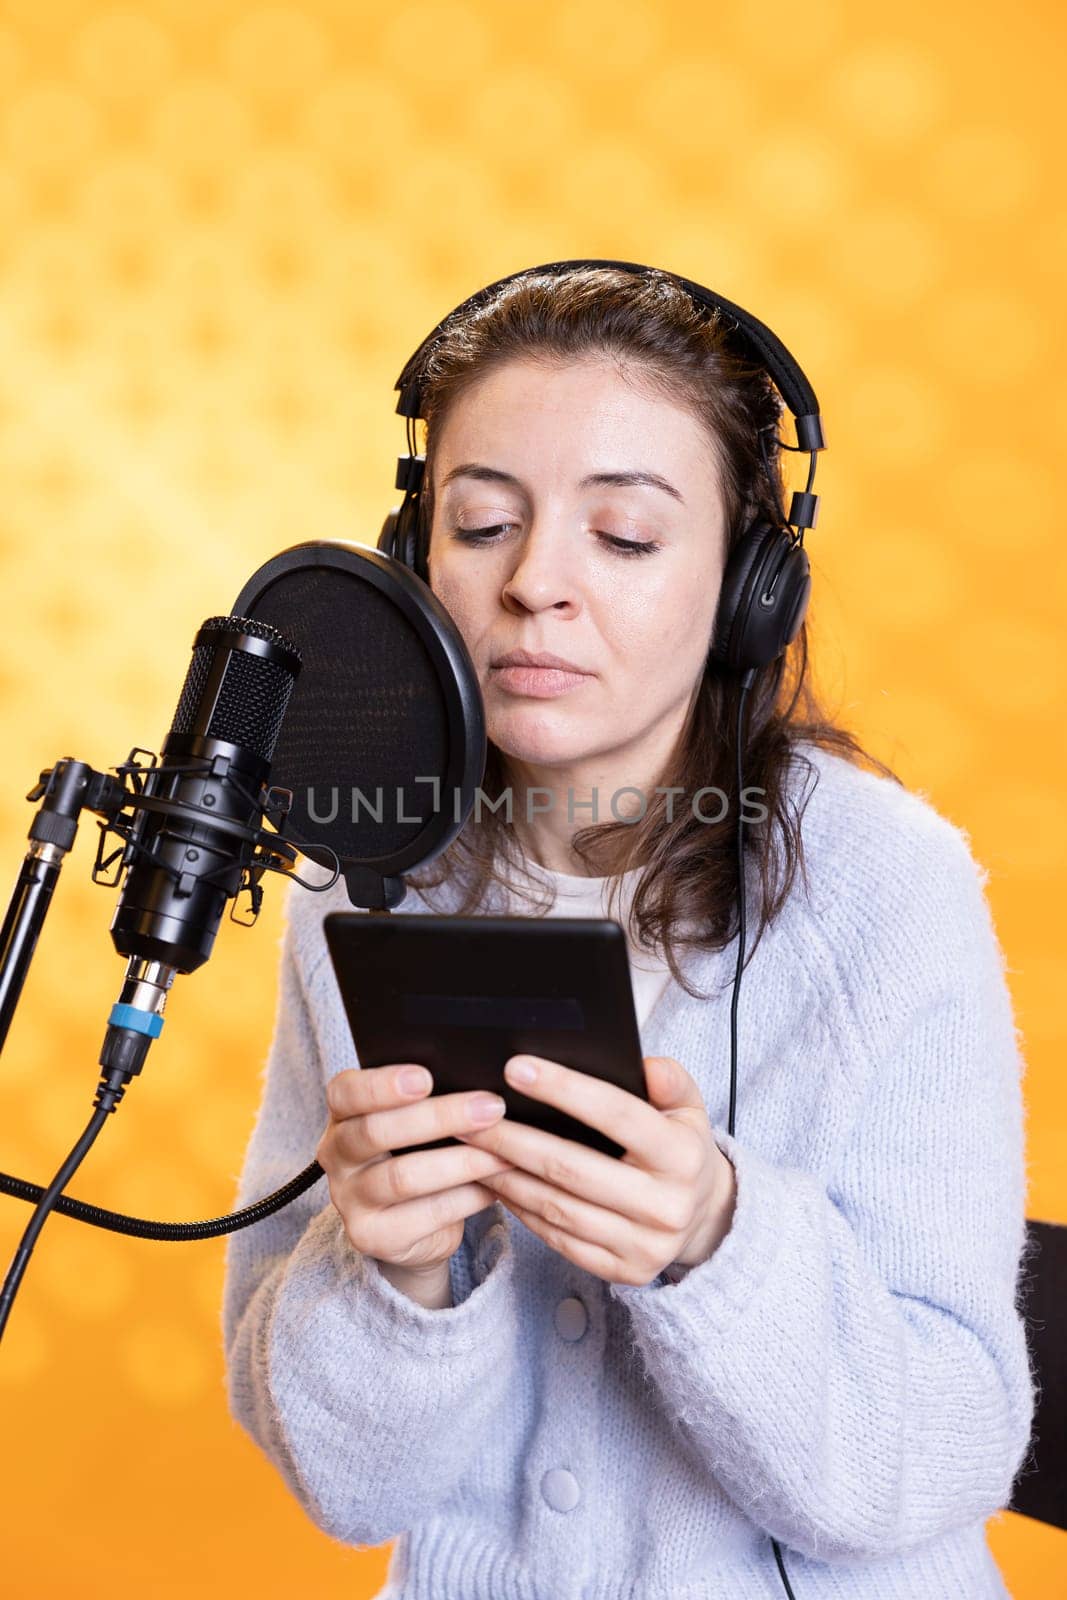 Woman doing voiceover word for word reading of ebook on ereader to produce audiobook. Narrator using storytelling skills while reading text from tablet, recording novel, studio background